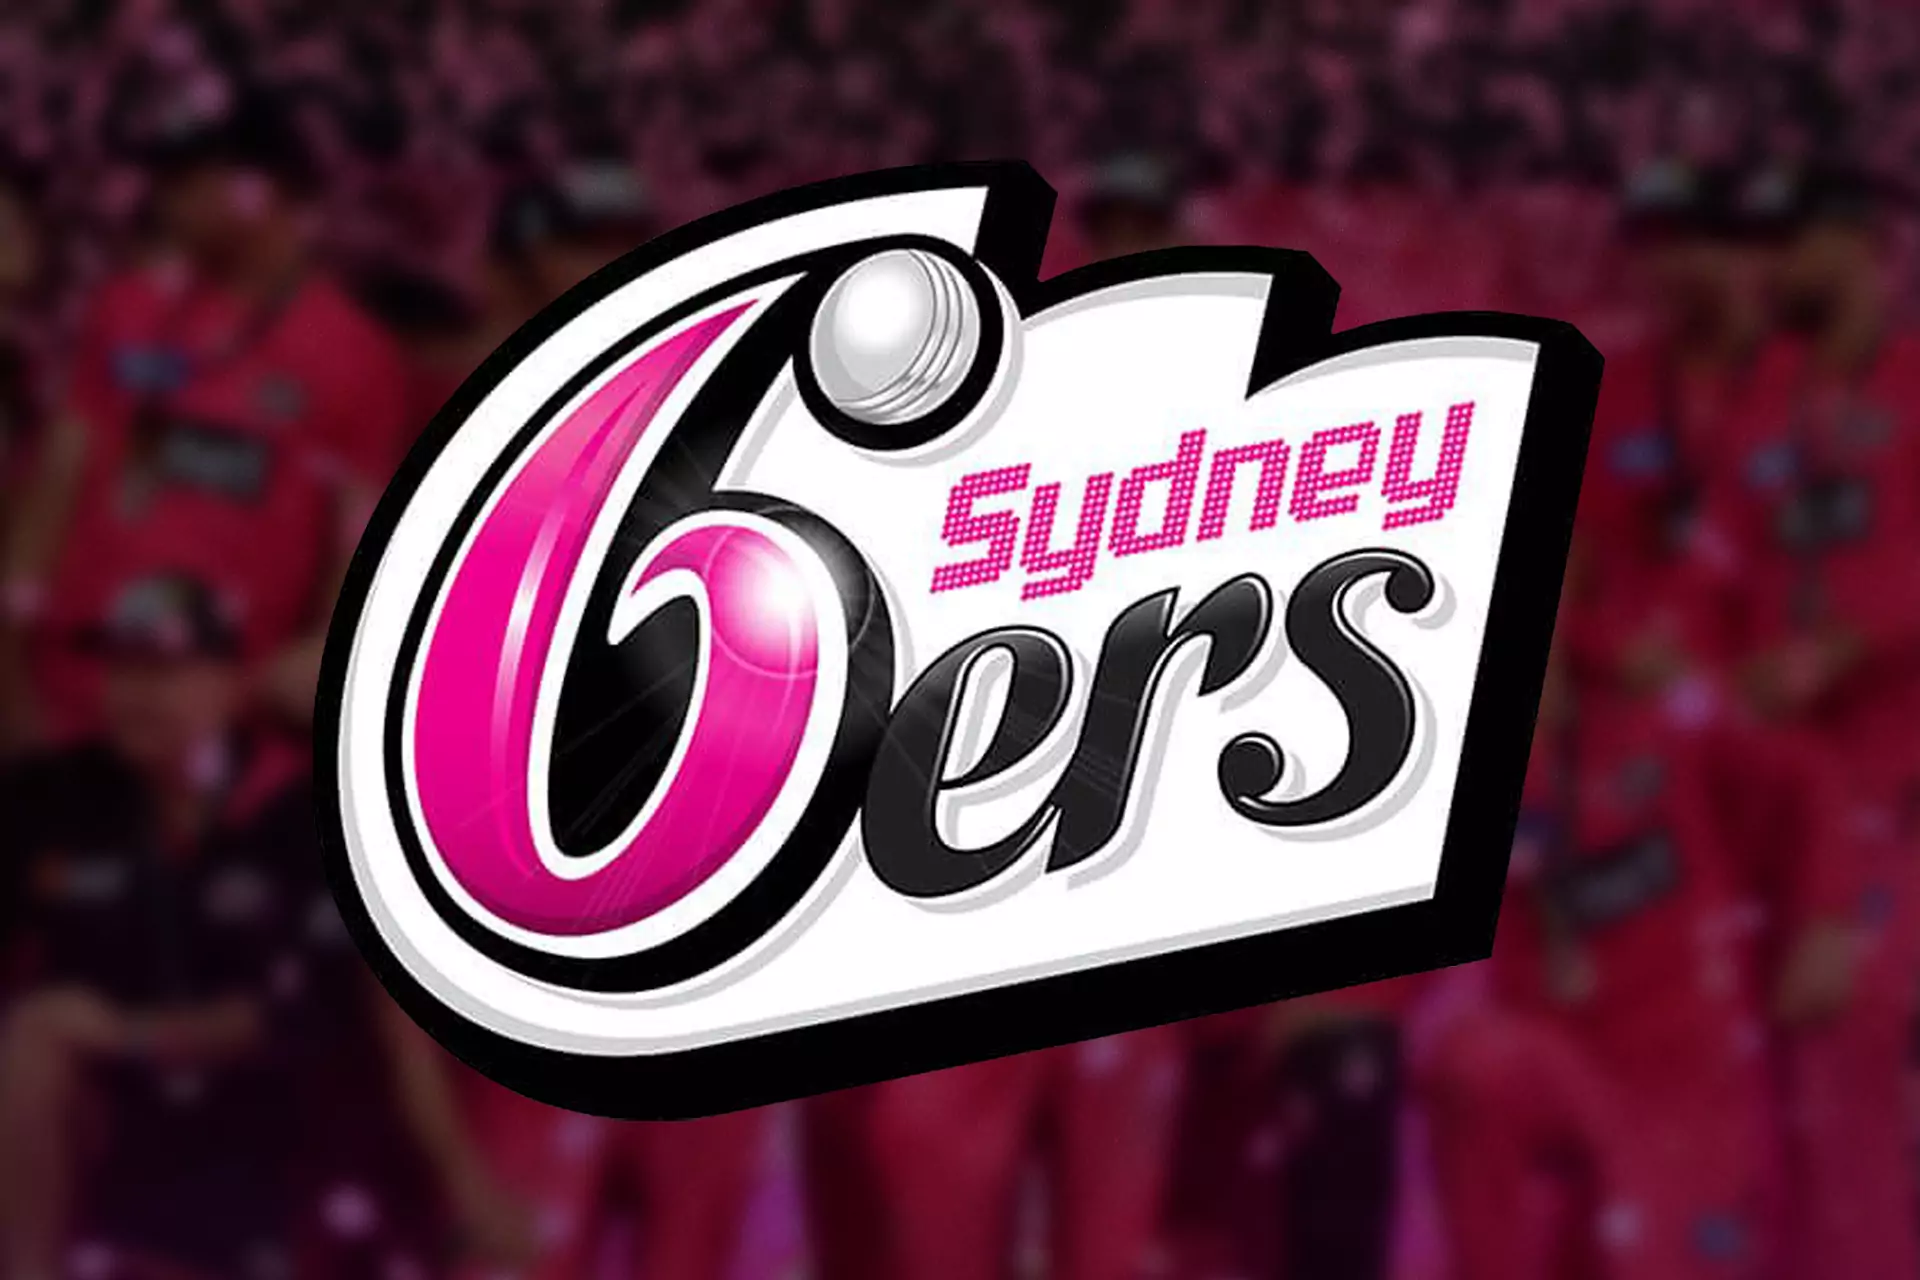 The Sydney Sixers always show an impressive game.